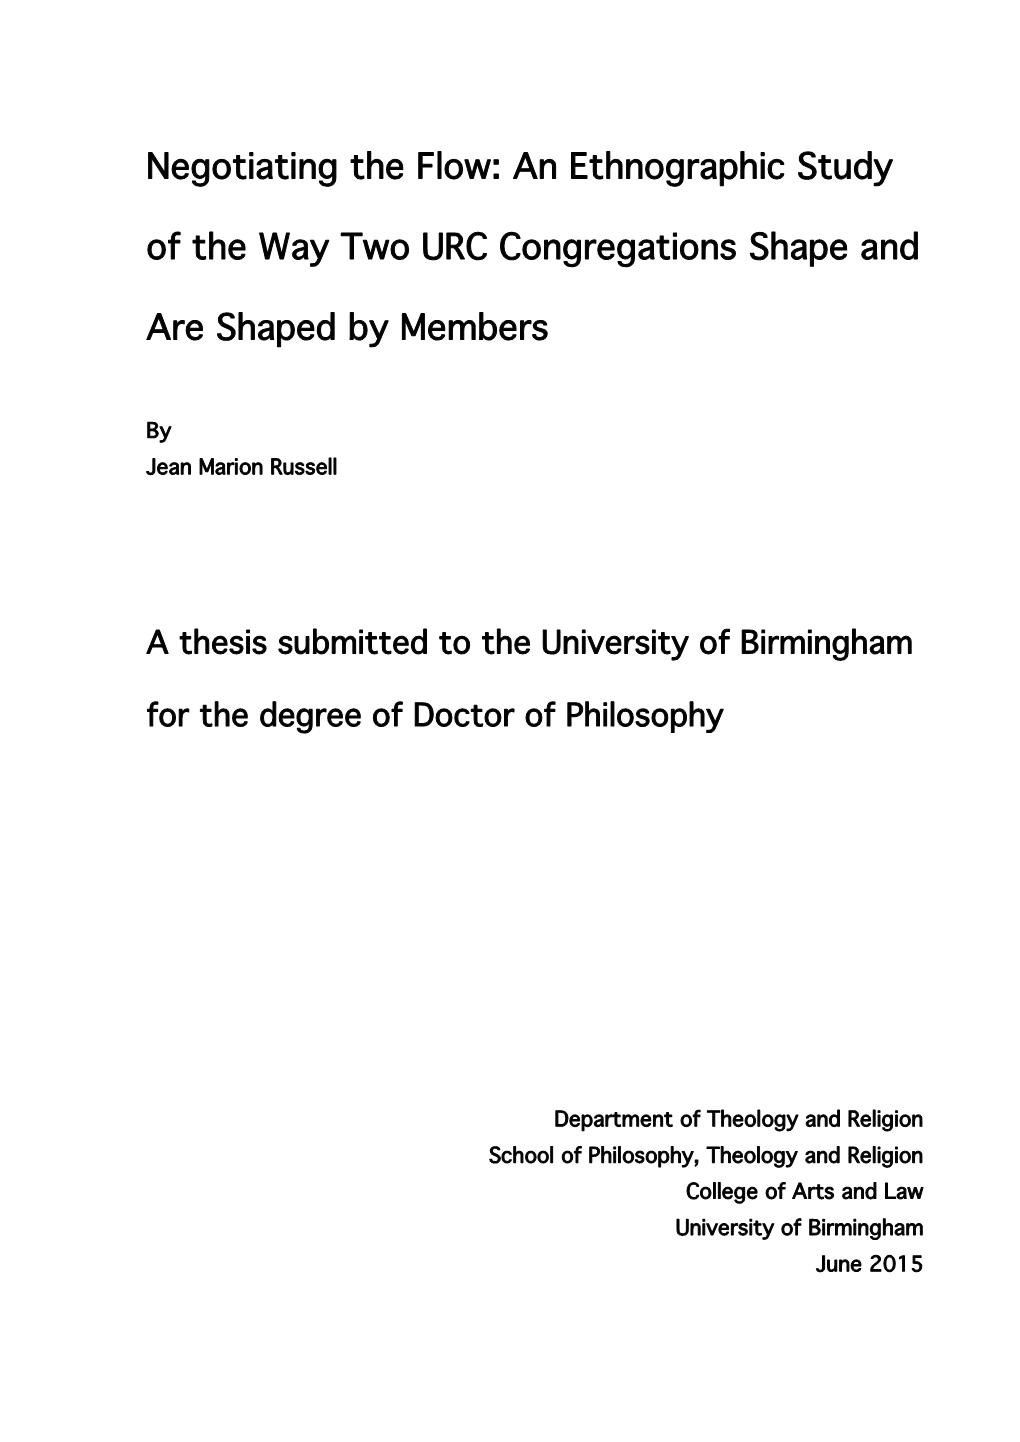 An Ethnographic Study of the Way Two URC Congregations Shape and Are Shaped by Members